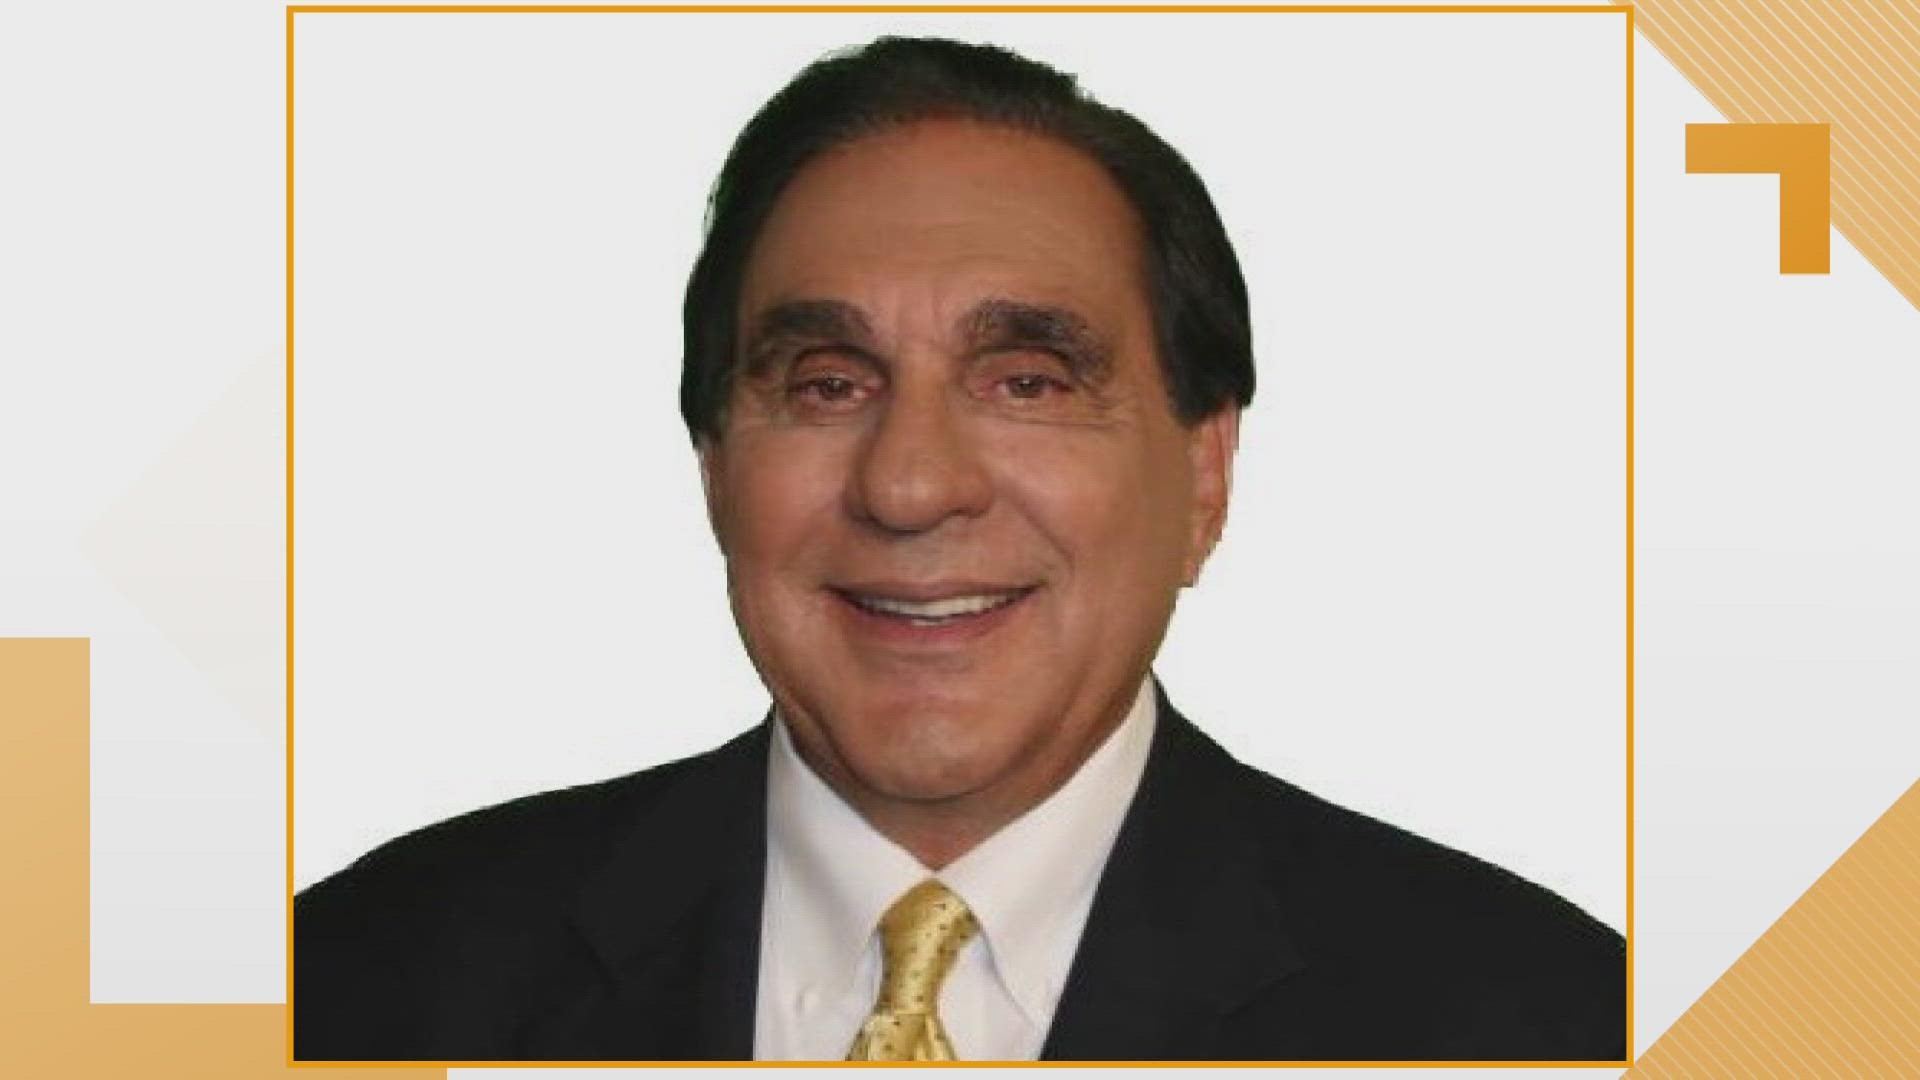 The former Bommarito Automotive Group president died Monday at the age of 88.